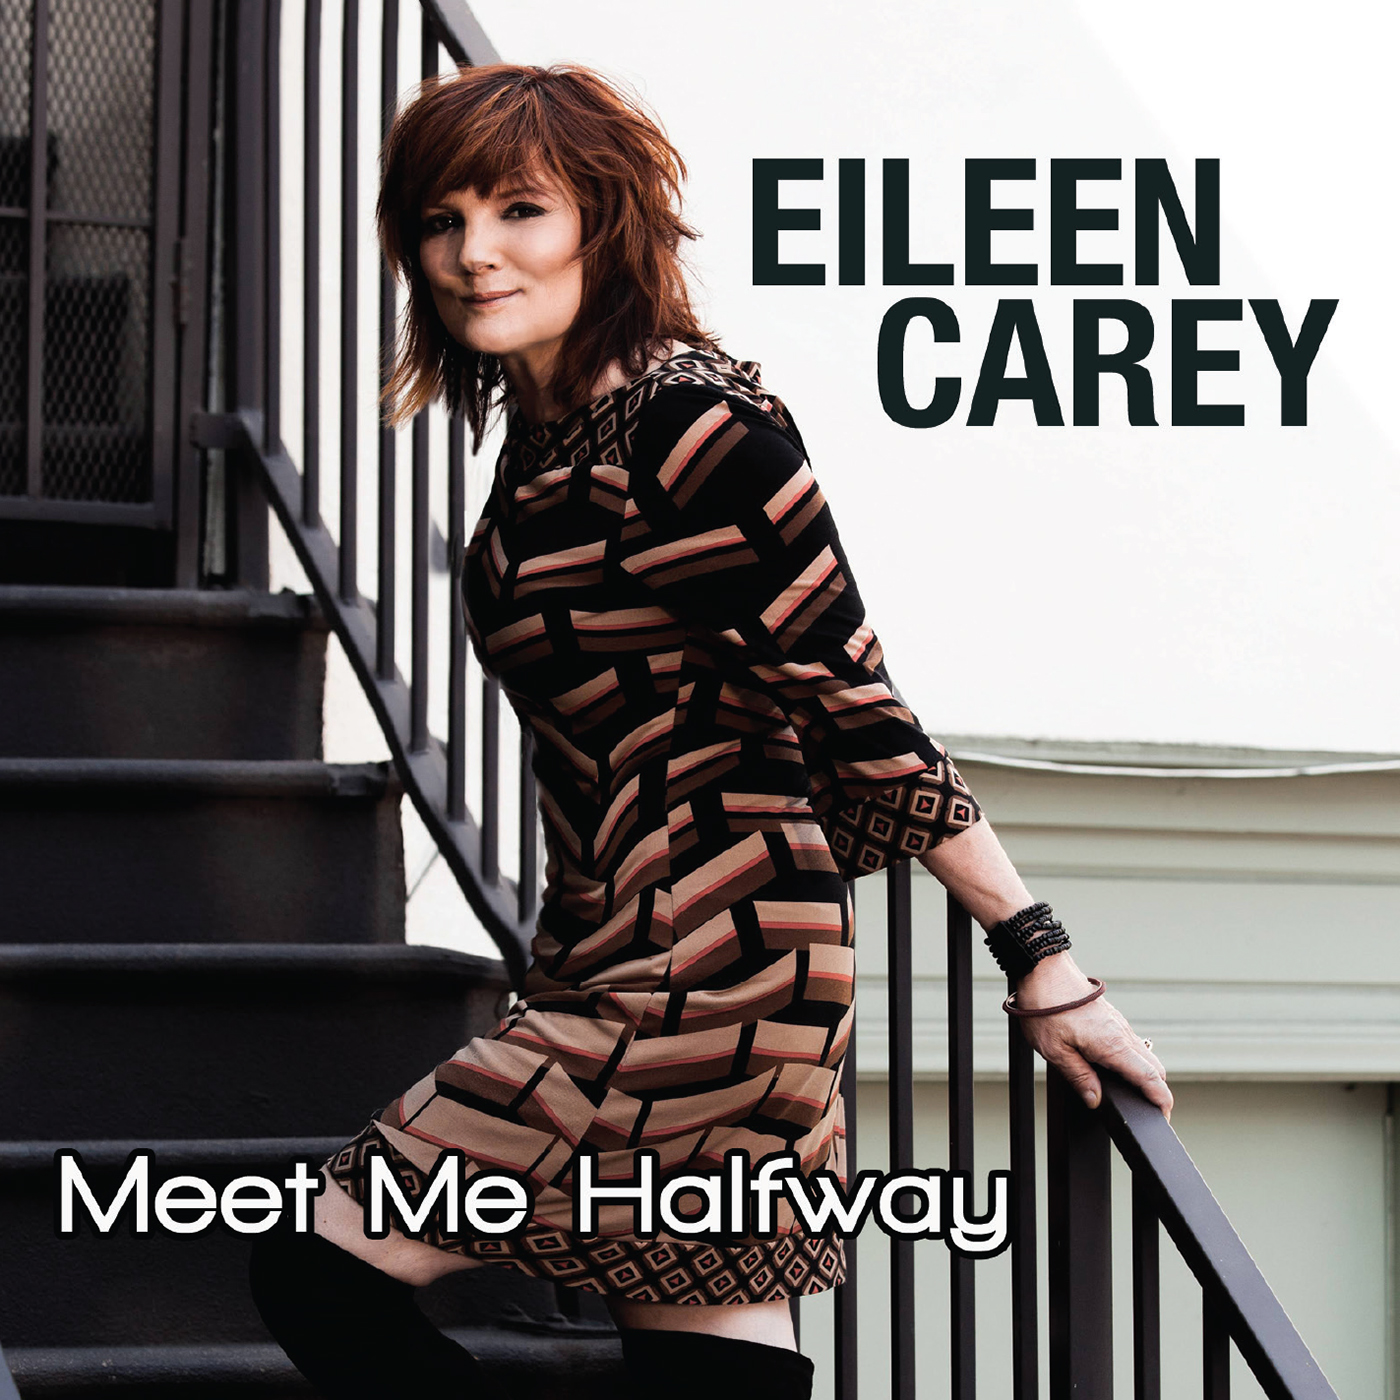 Eileen Carey wearing brown plaid dress standing on stairs